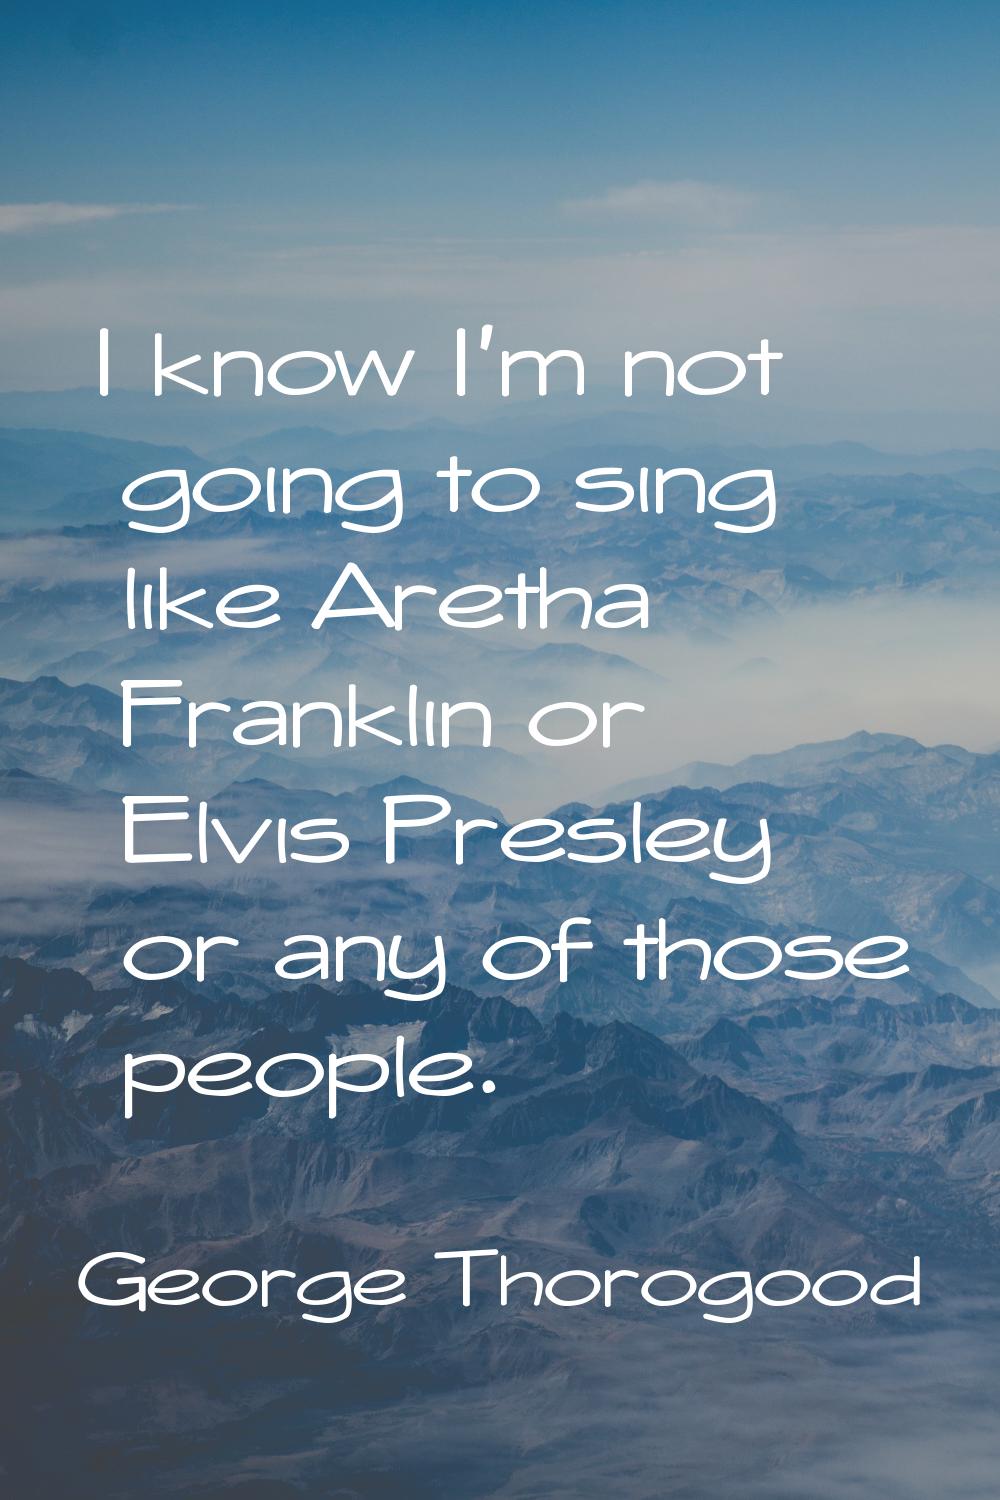 I know I'm not going to sing like Aretha Franklin or Elvis Presley or any of those people.